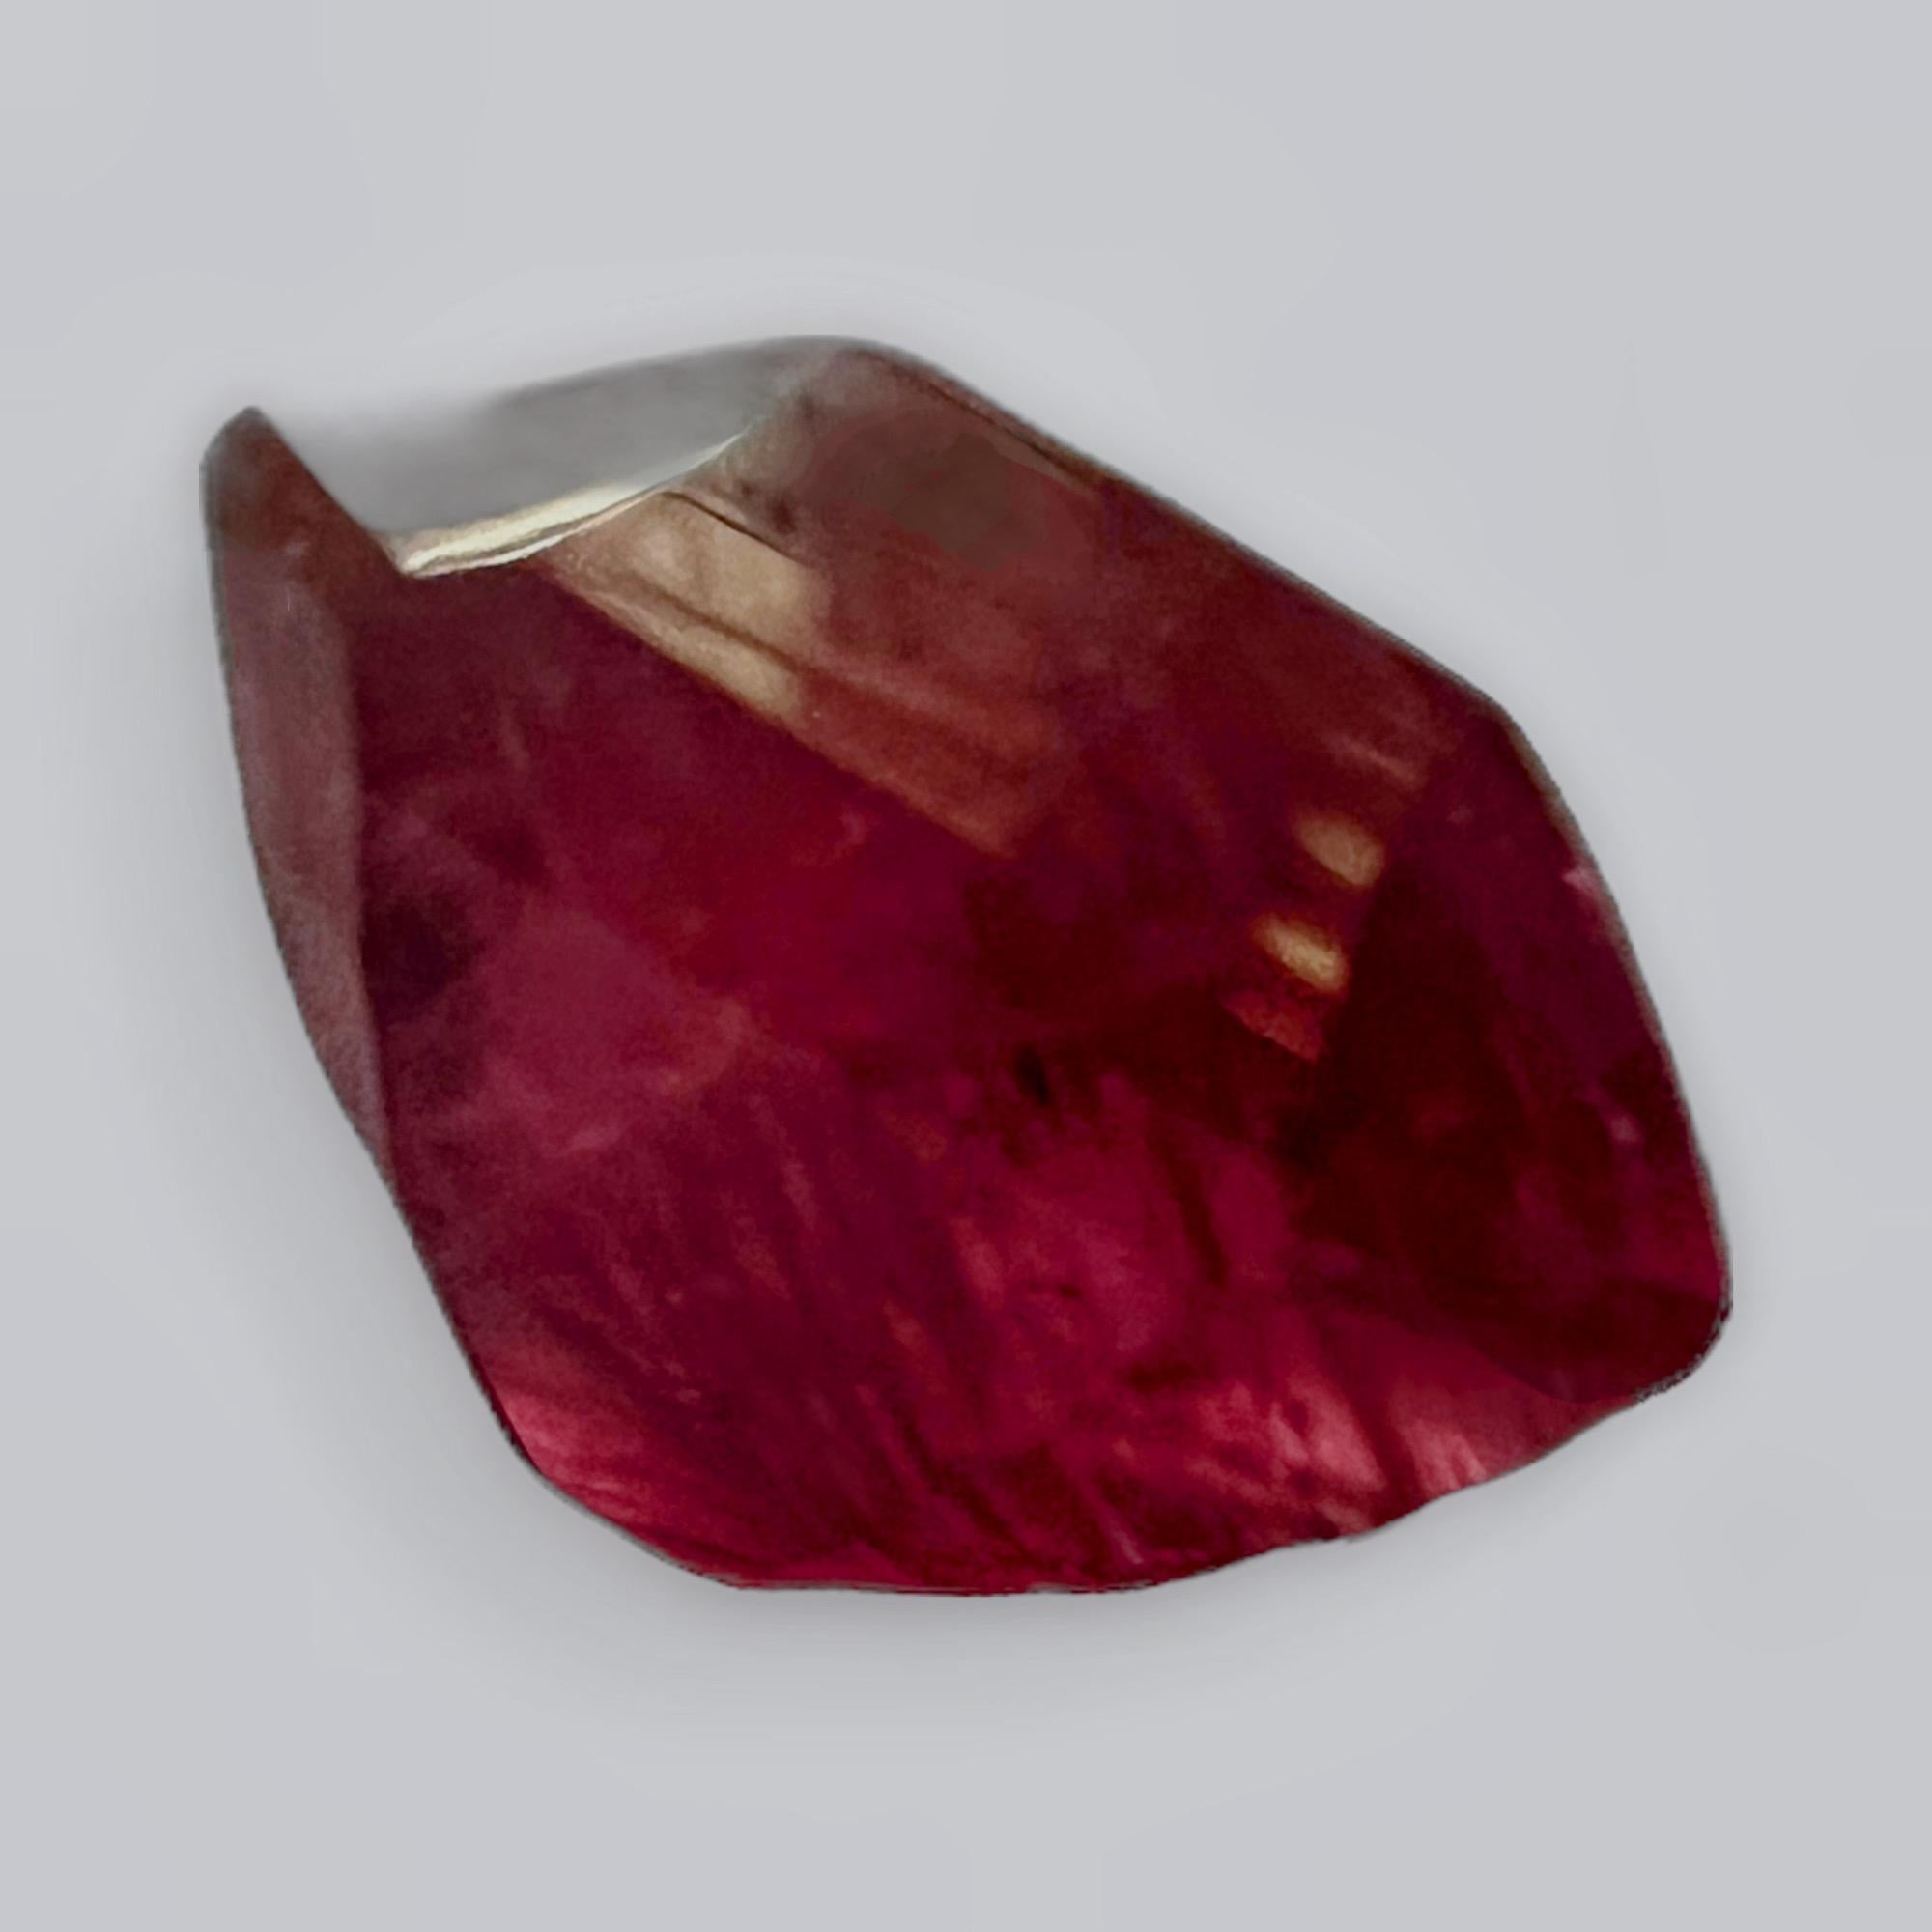 This is a stunningly massive 14.88ct Cushion Cut Intense Red Rubellite Tourmaline. This gemstone is a true testament to nature's artistry, boasting an intense red hue that exudes confidence and allure. This rubellite gemstone is ready to be the